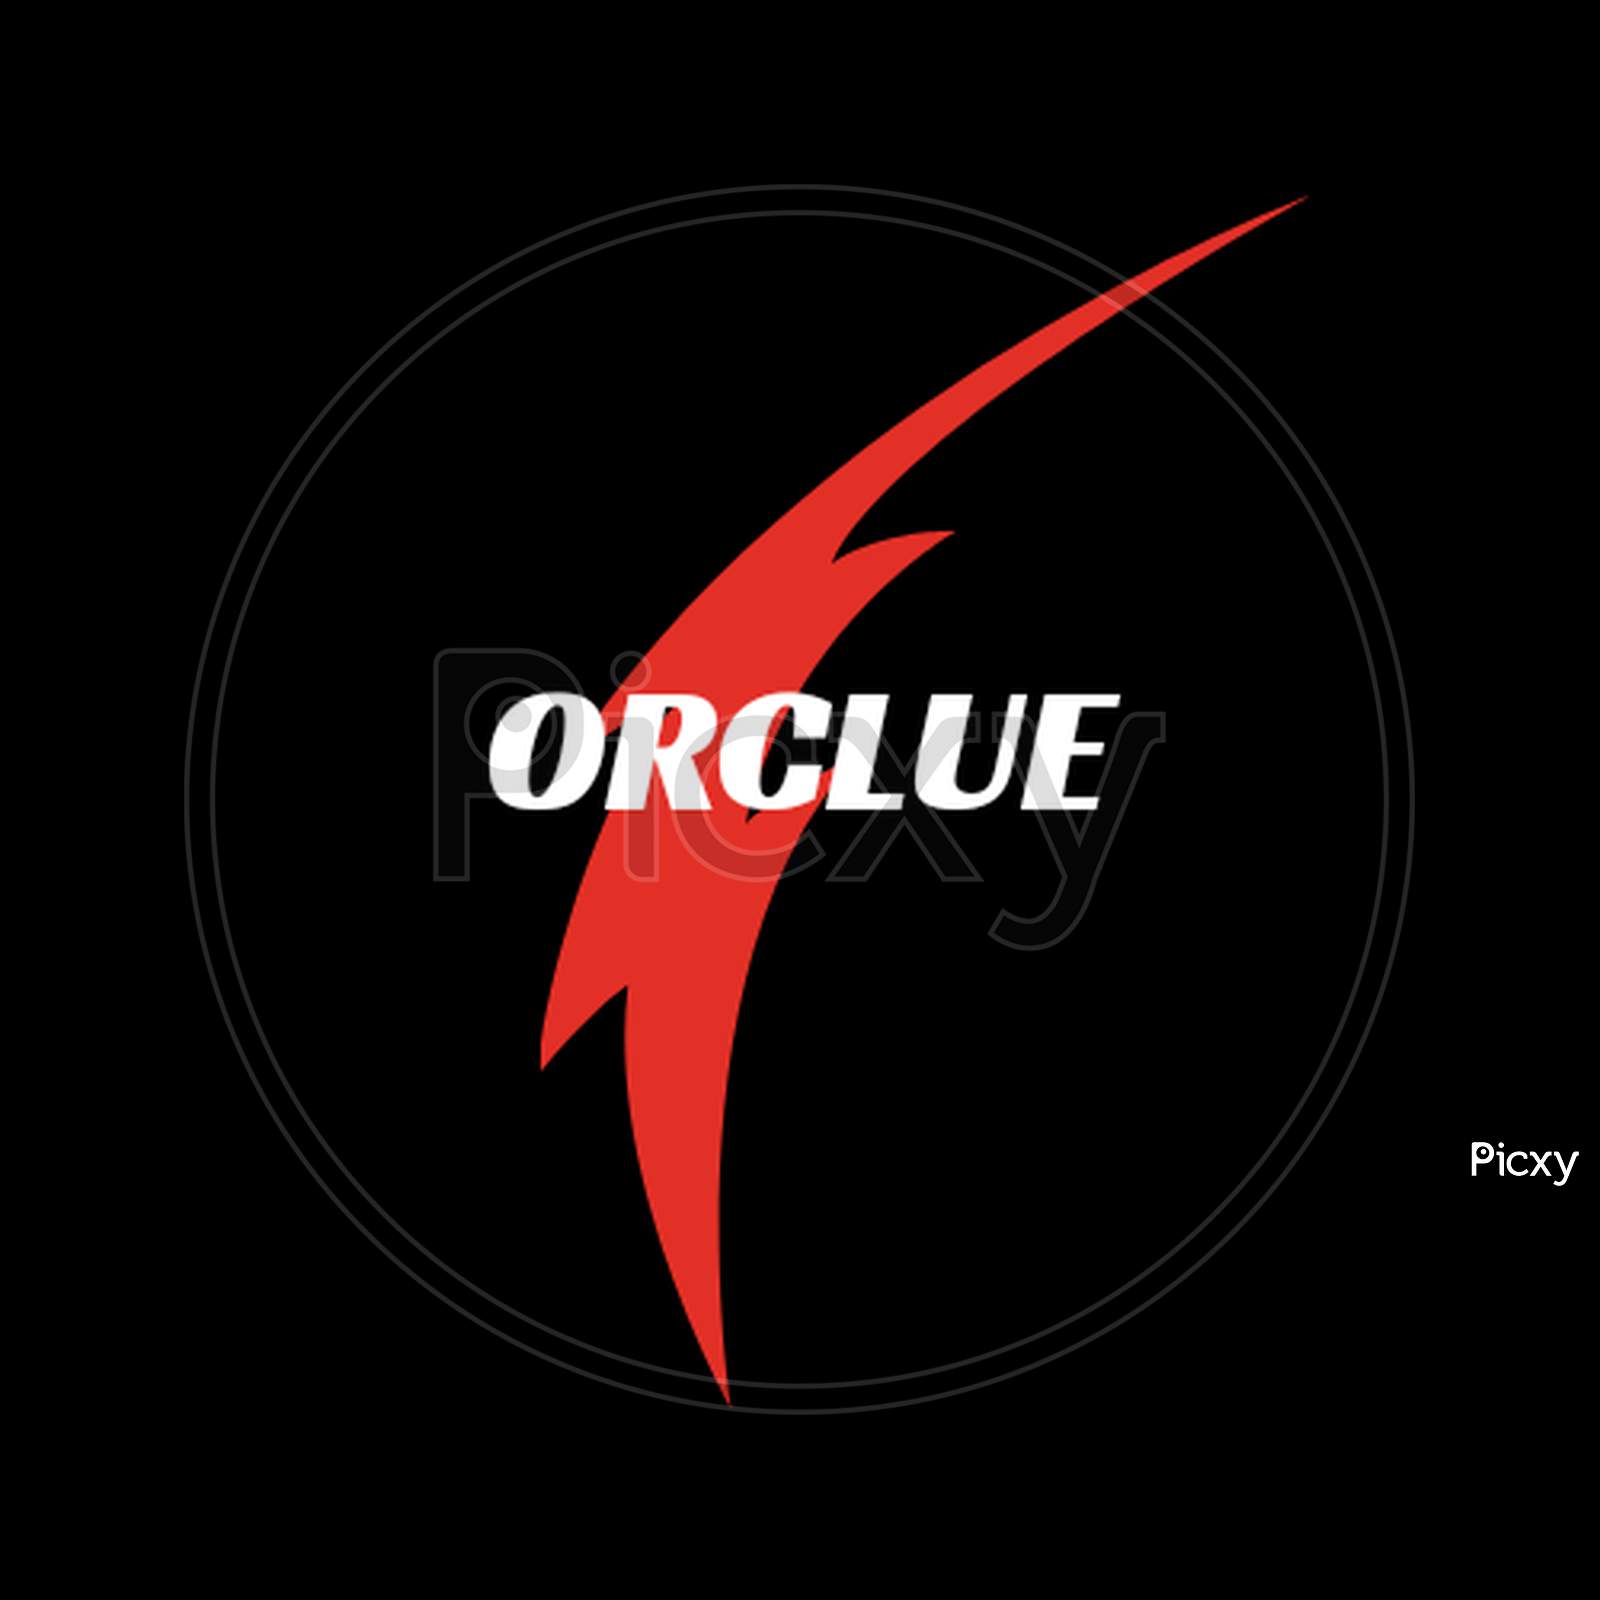 A Professional ORCLUE LOGO